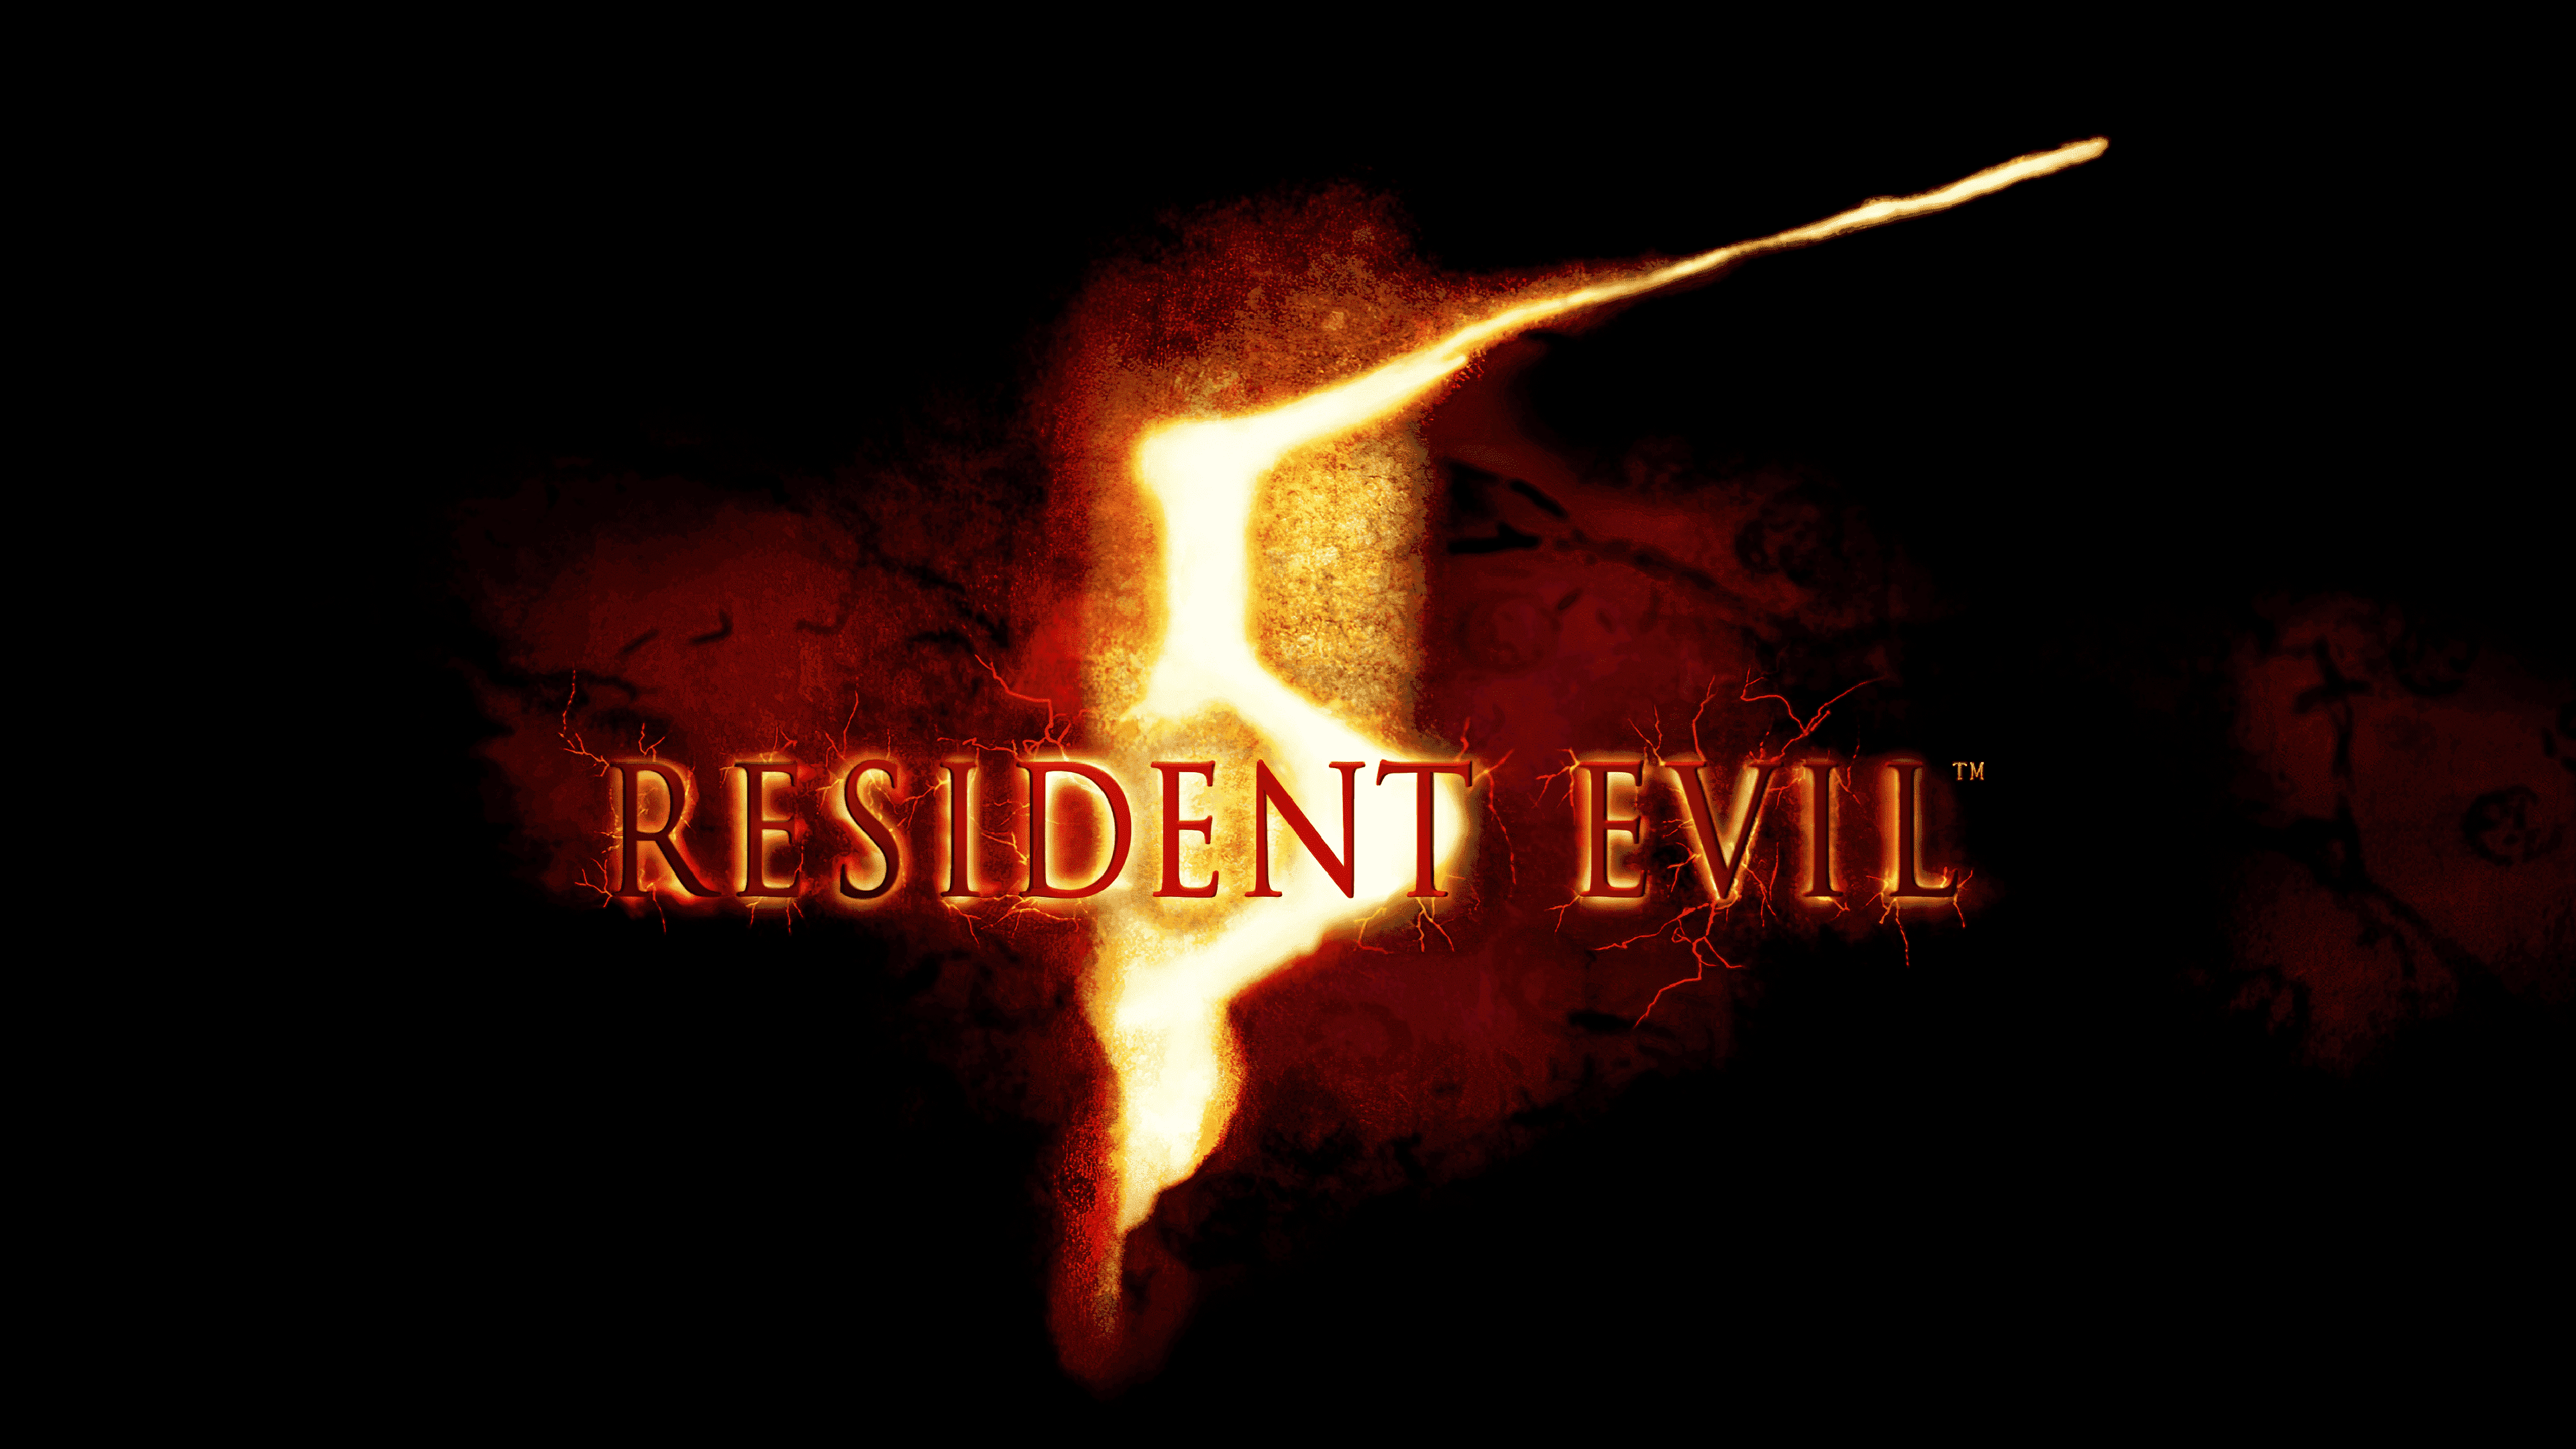 The Resident Evil logo through the years